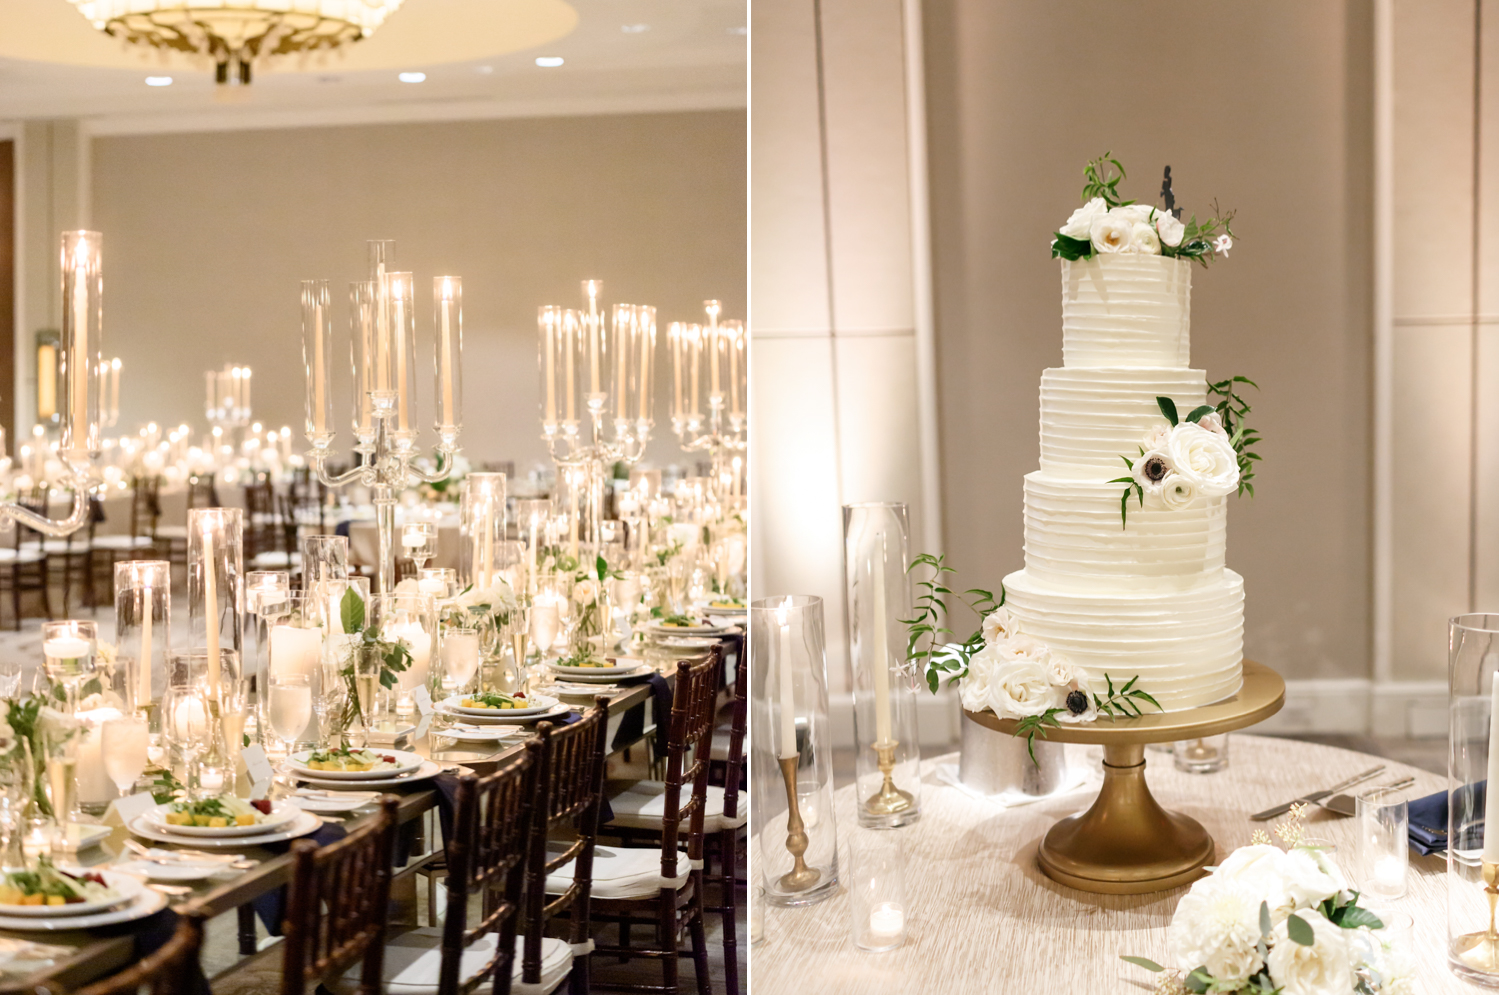 Left: A wide shot of the reception tables. They are set with tall candles, white china, and crystal glasses.